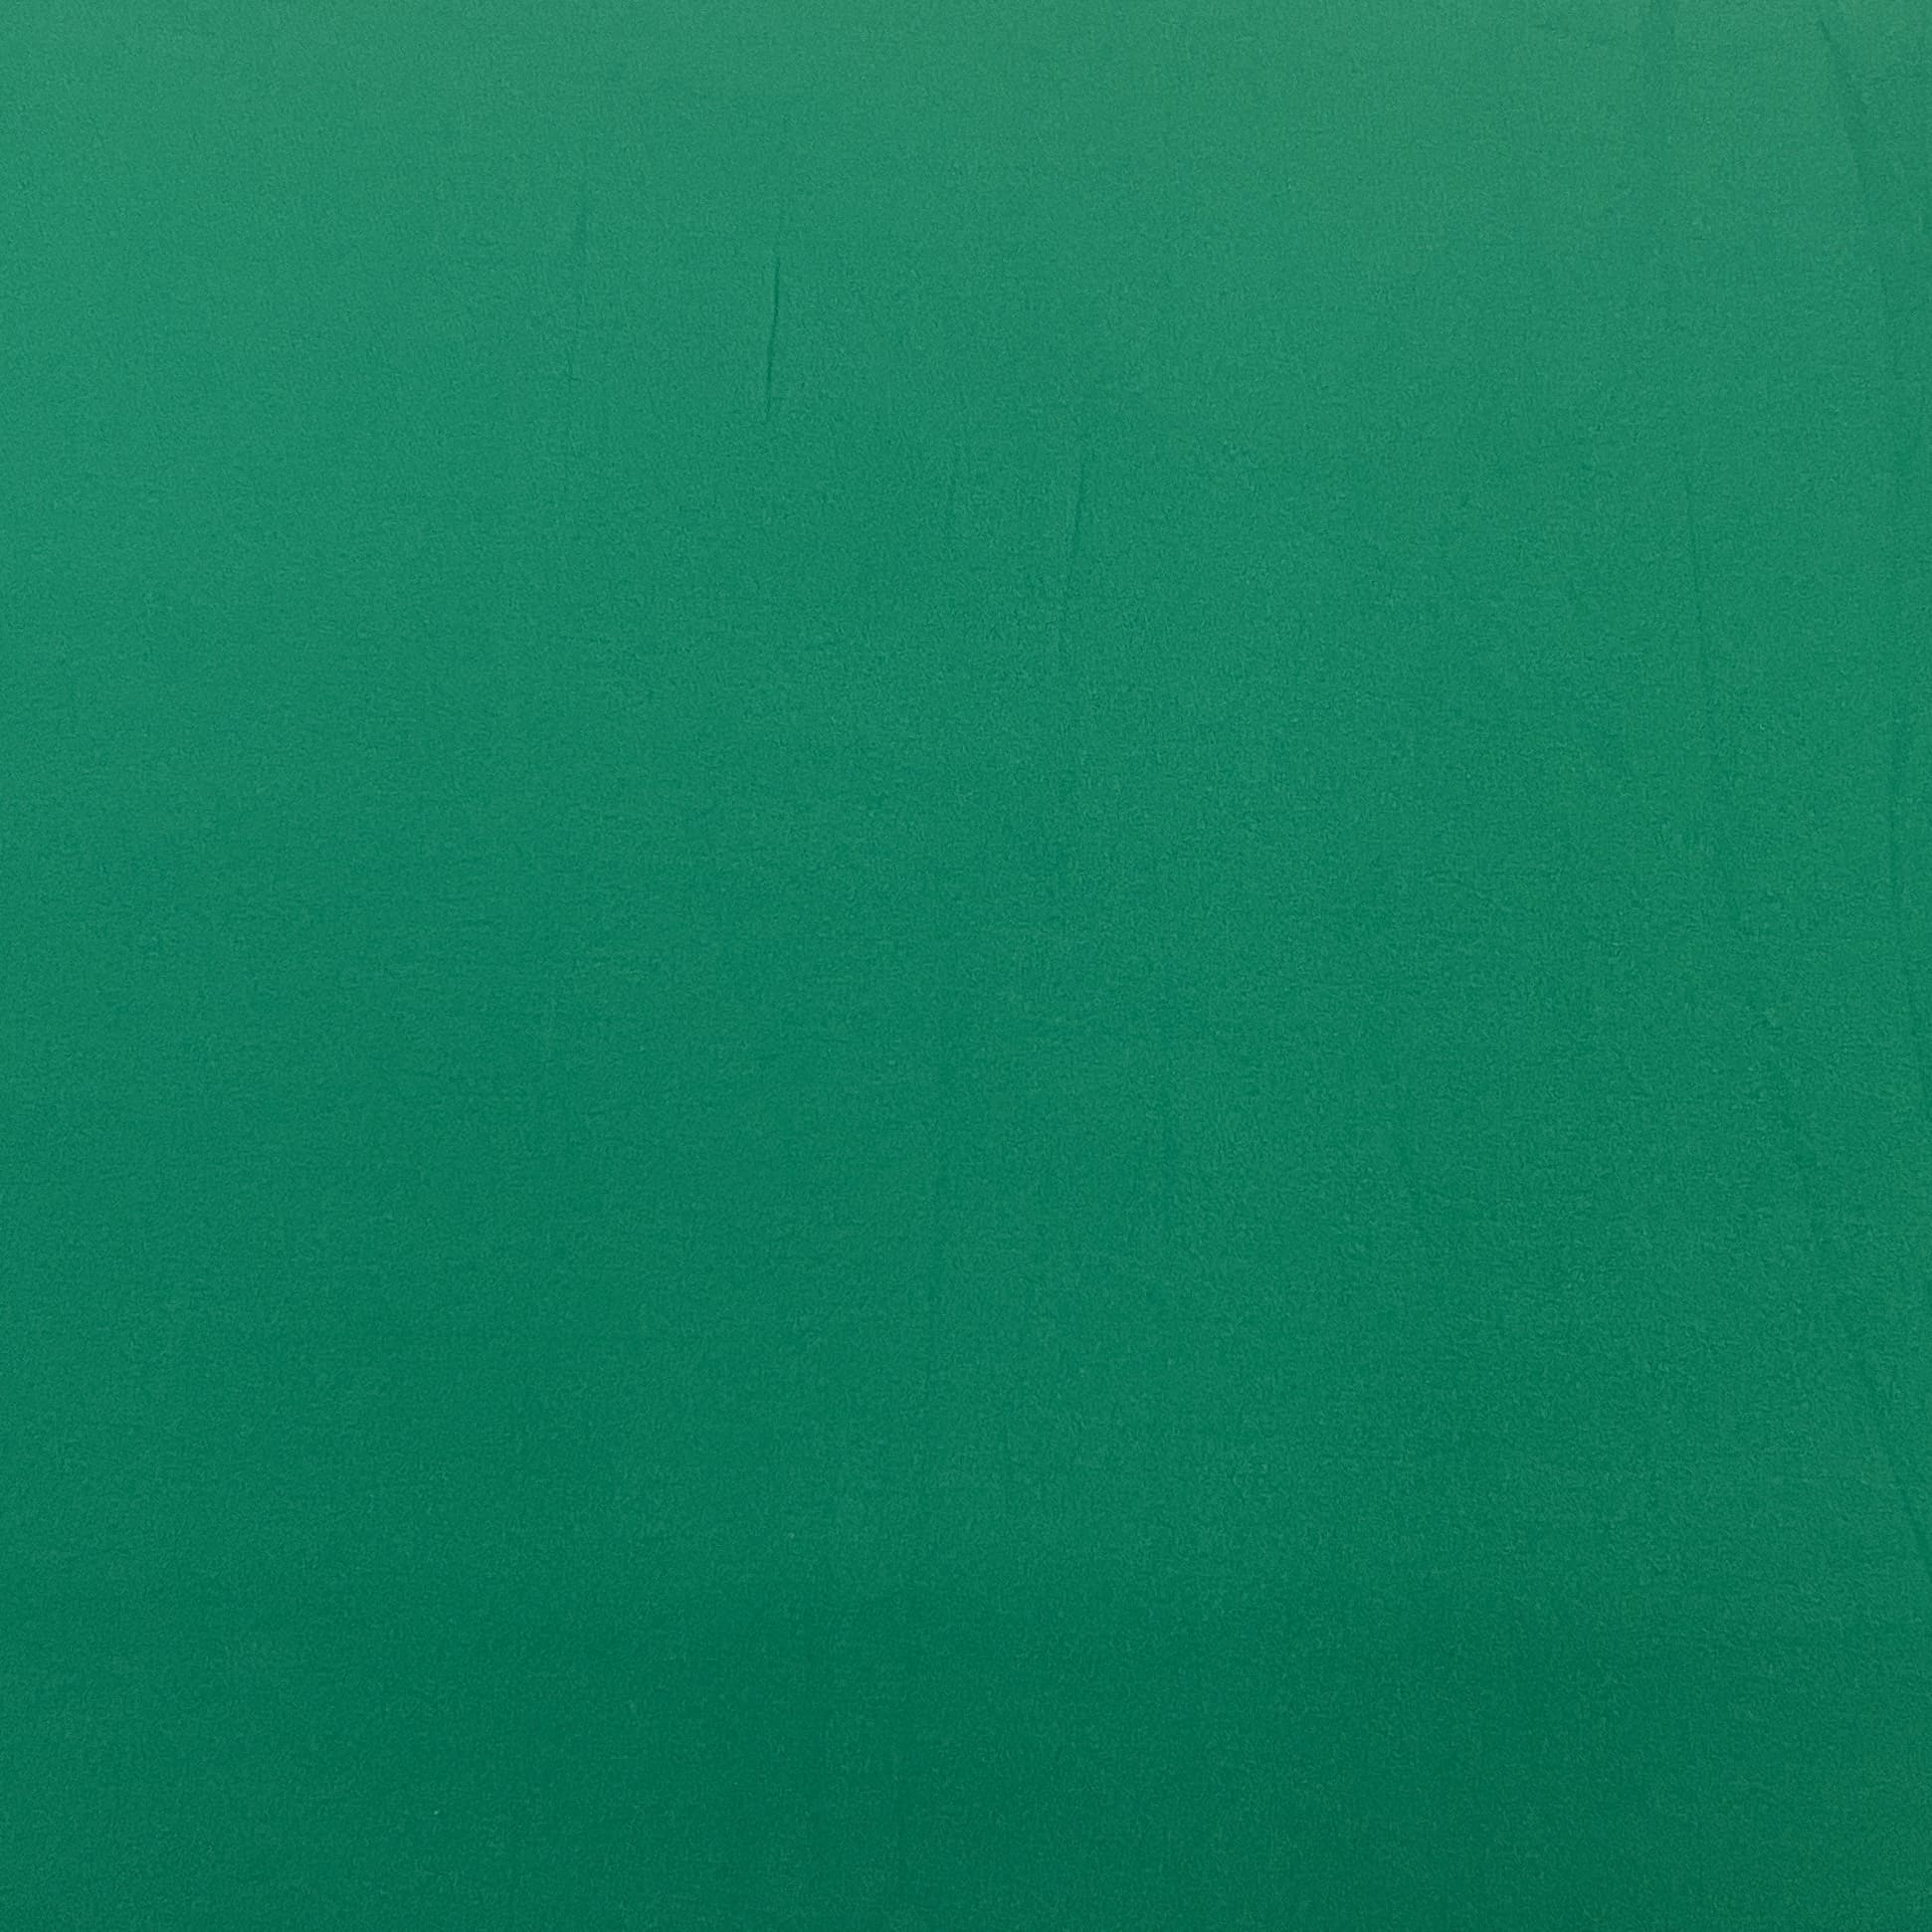 Exclusive Pine Green Solid Malai Crepe Fabric